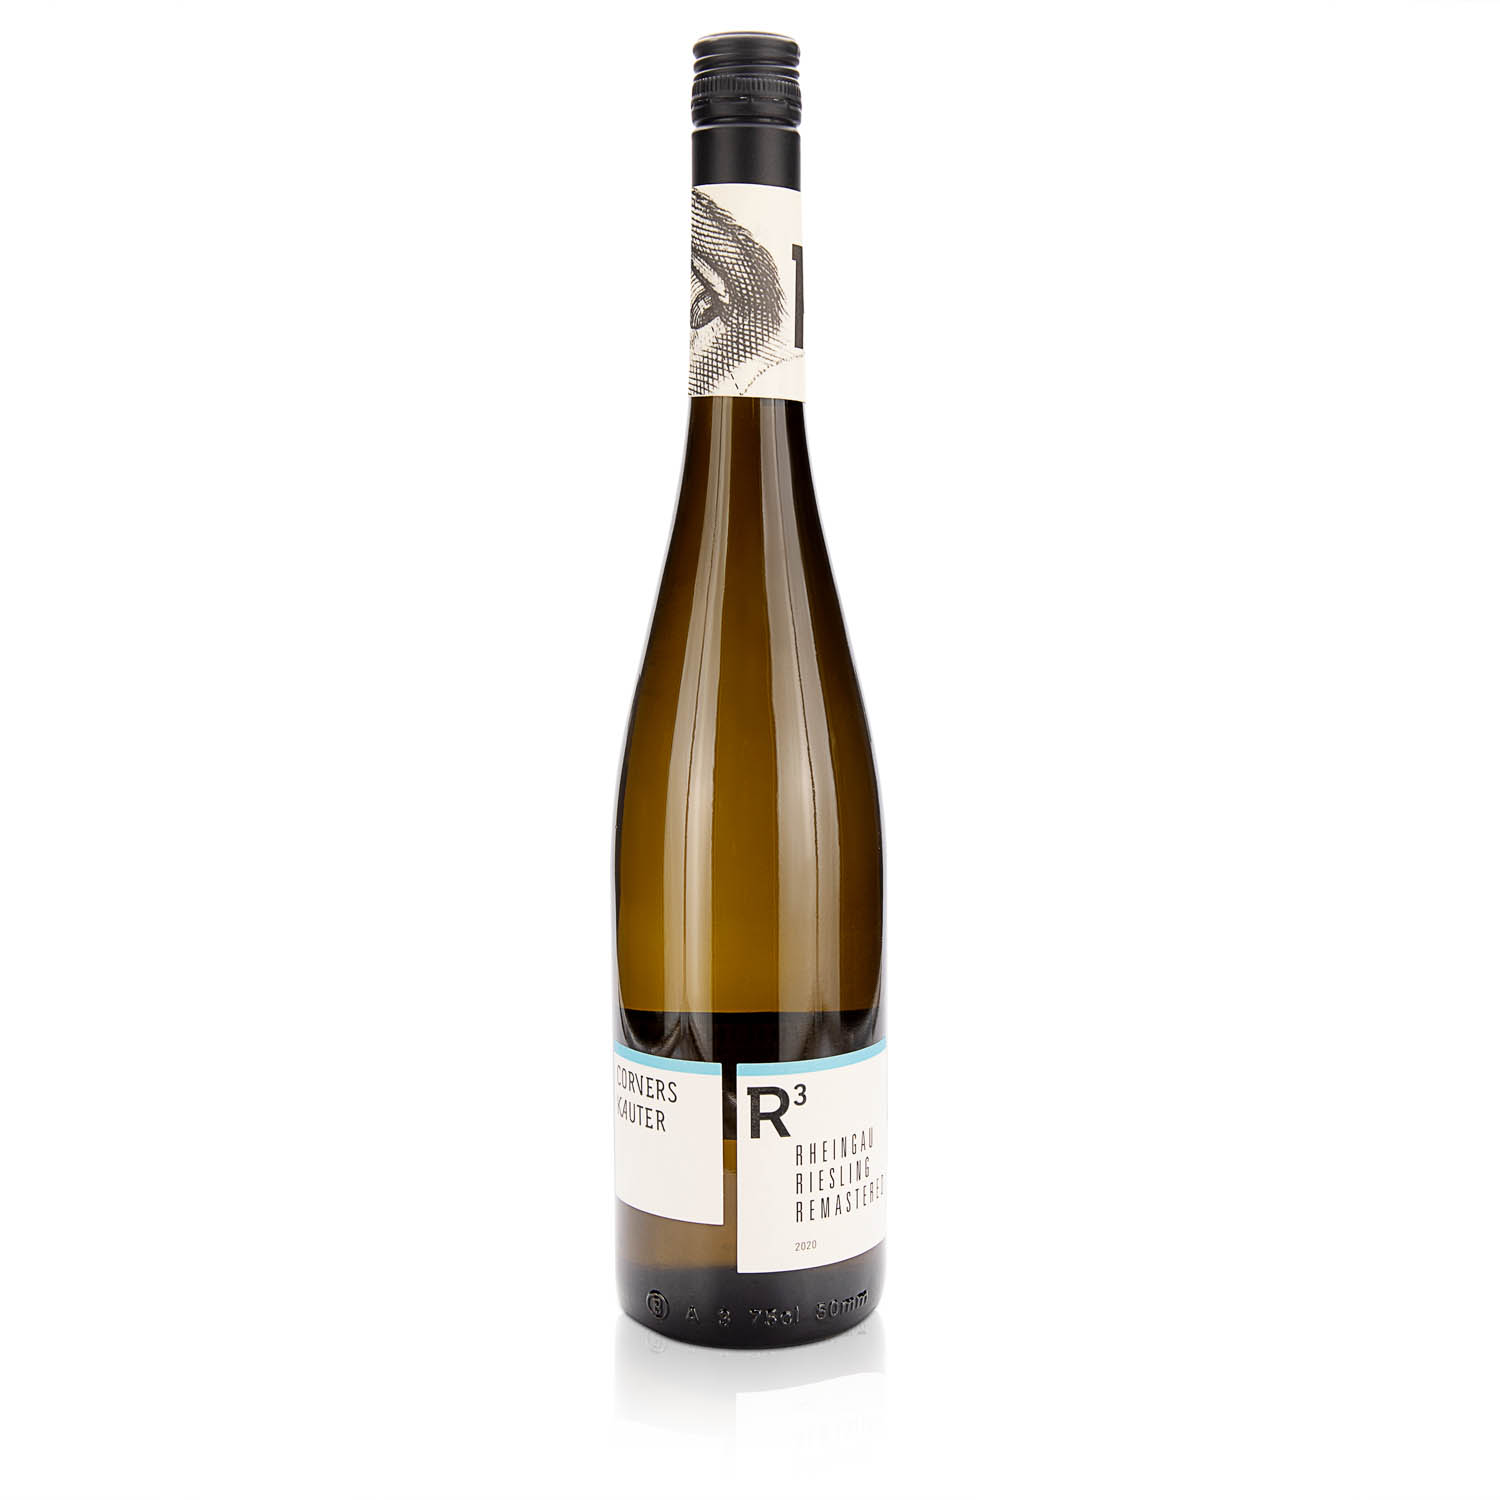 Dr. Corvers-Kauter - Riesling Remastered R3 Gutswein tr.